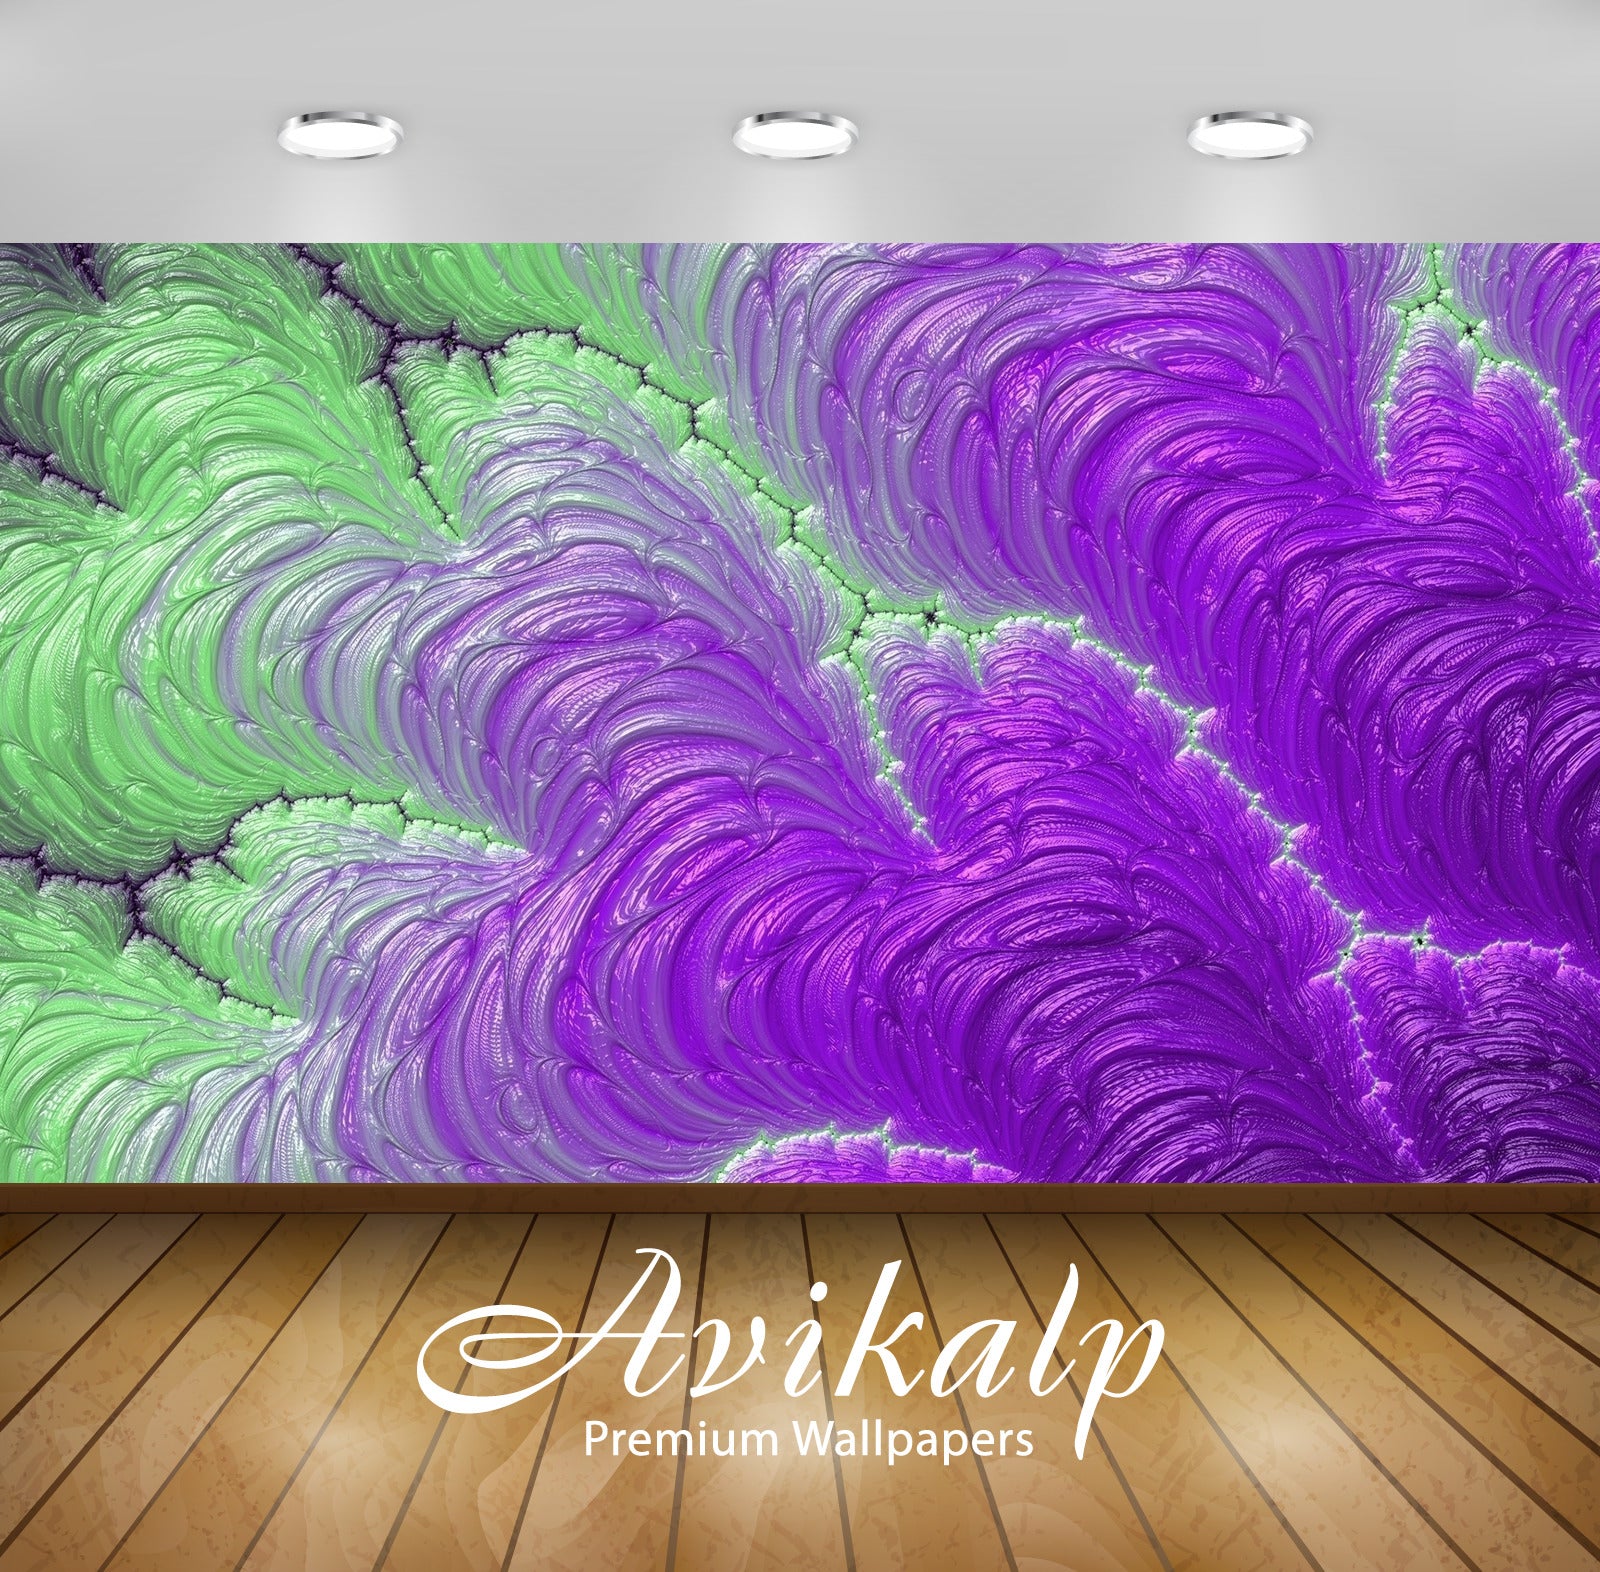 Avikalp Exclusive Awi4387 Fractal Paint Full HD Wallpapers for Living room, Hall, Kids Room, Kitchen